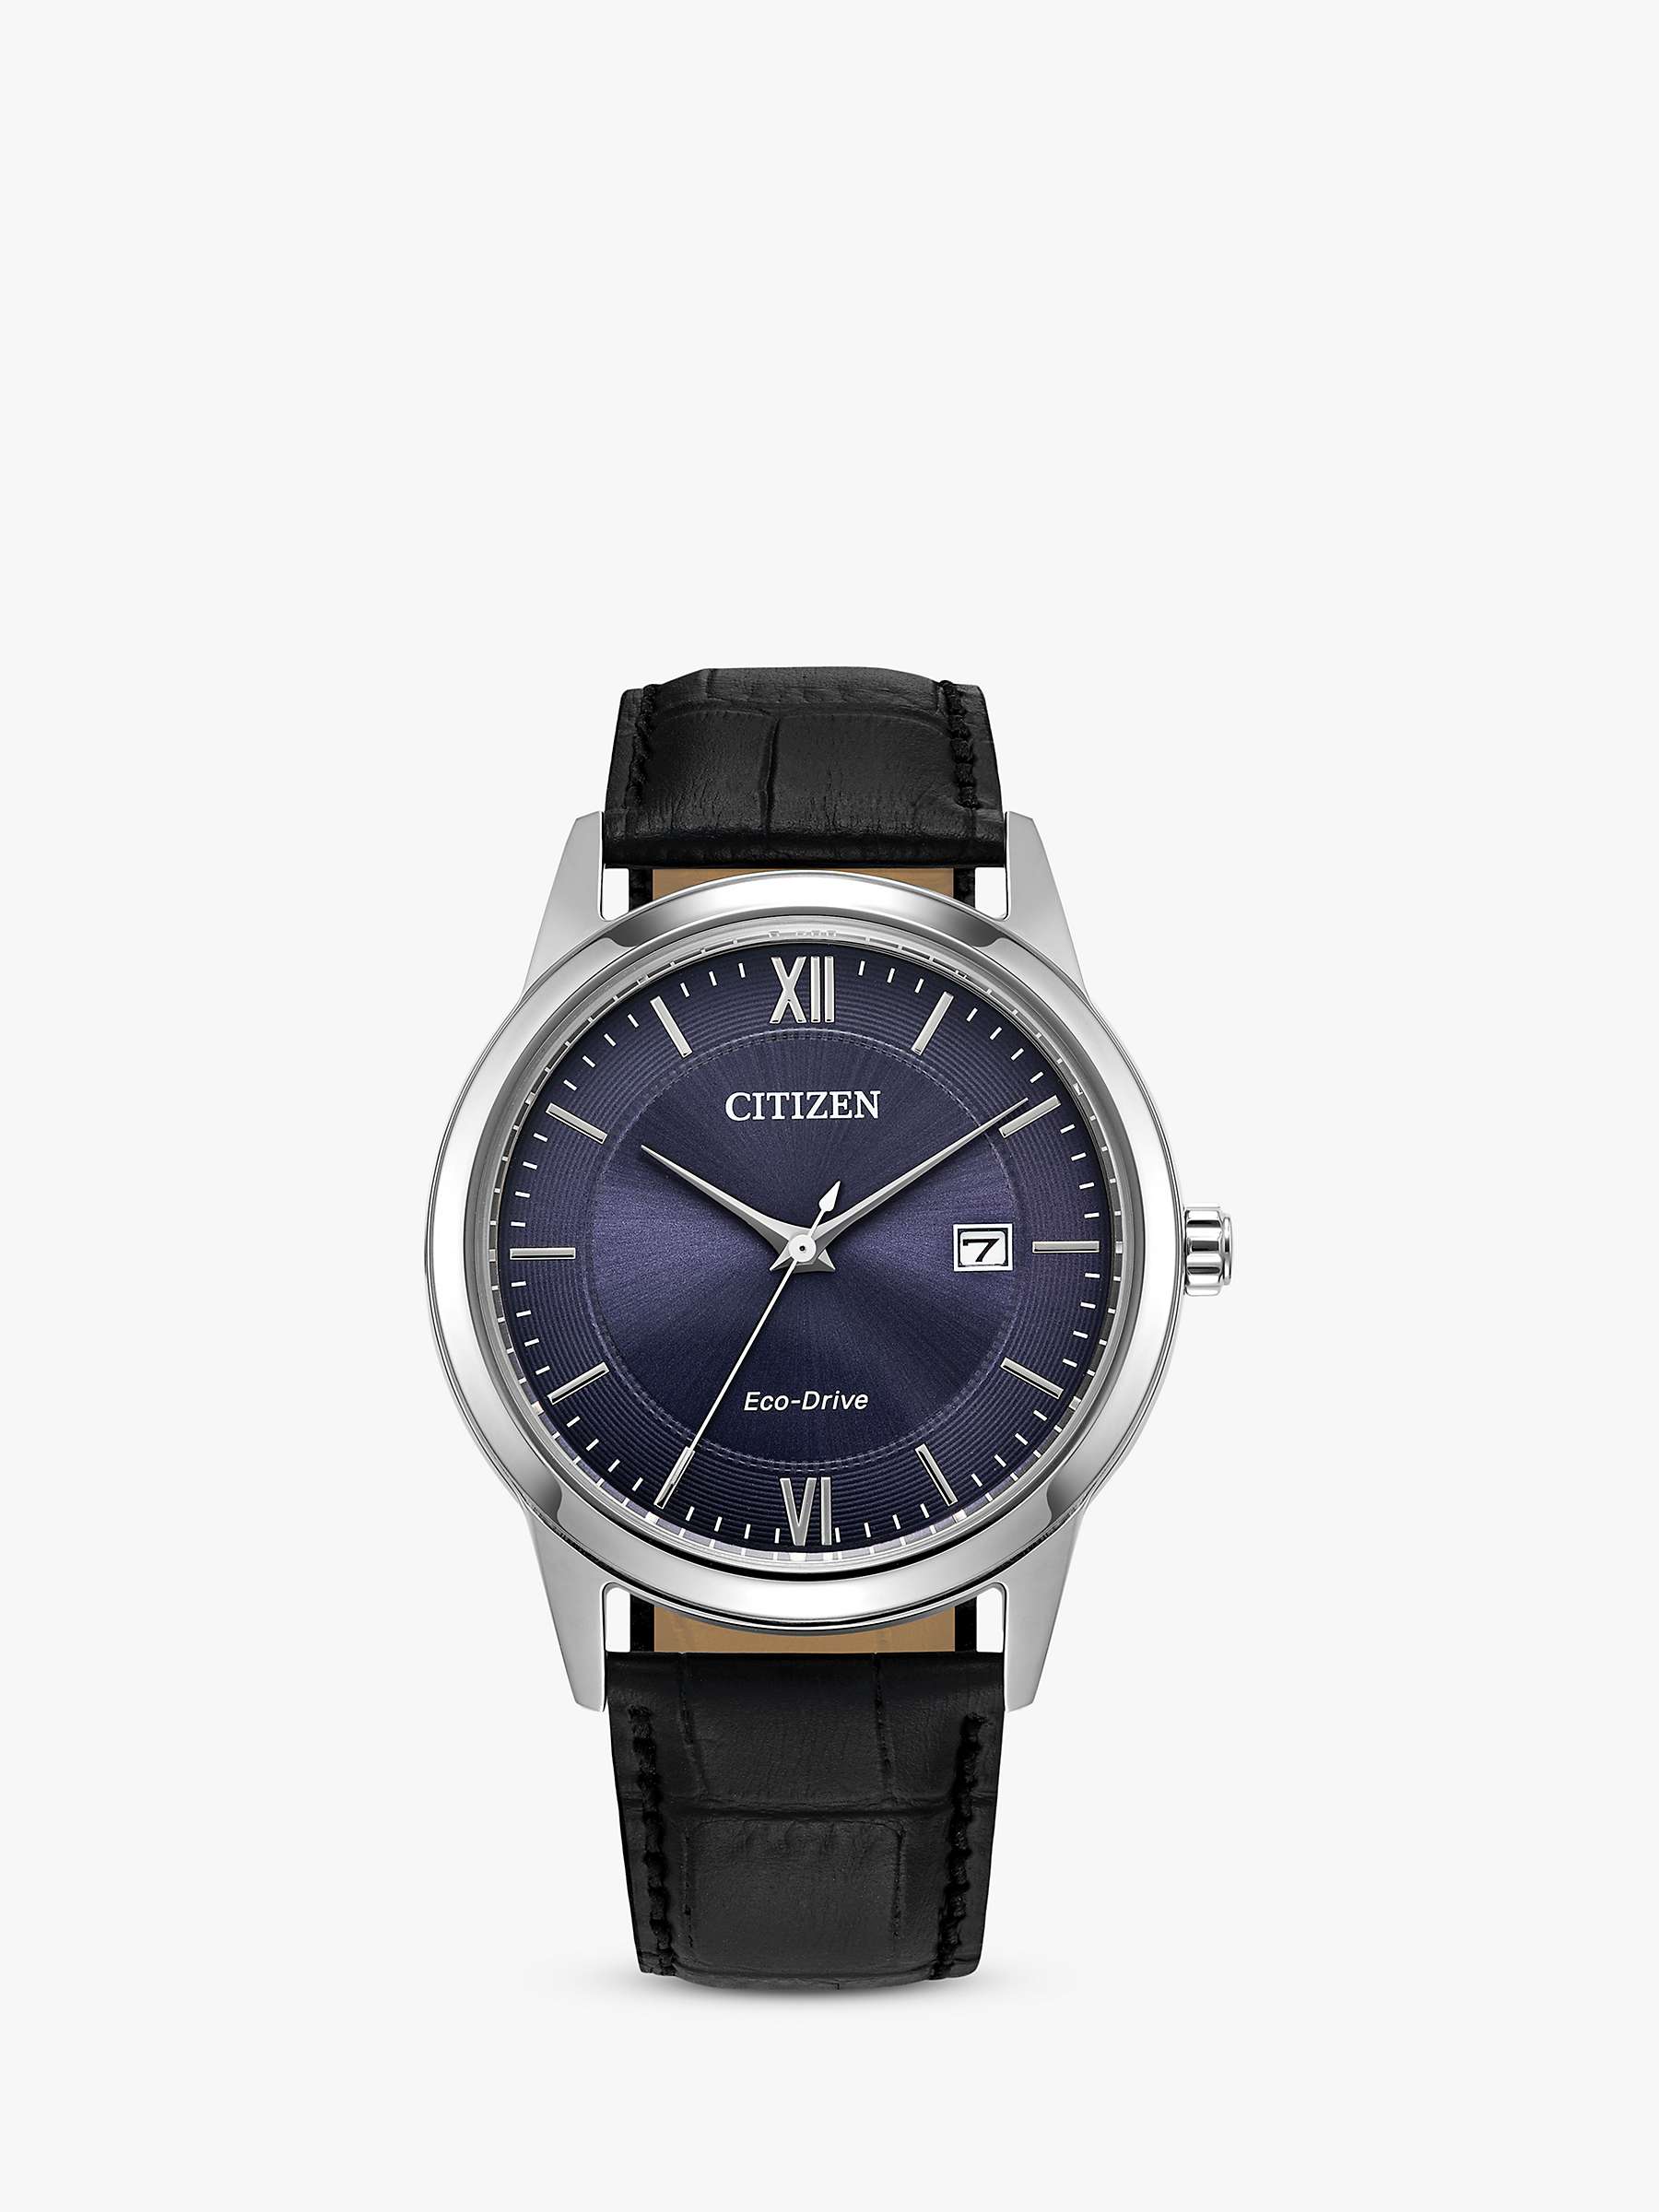 Buy Citizen Men's Eco-Drive Date Leather Strap Watch Online at johnlewis.com